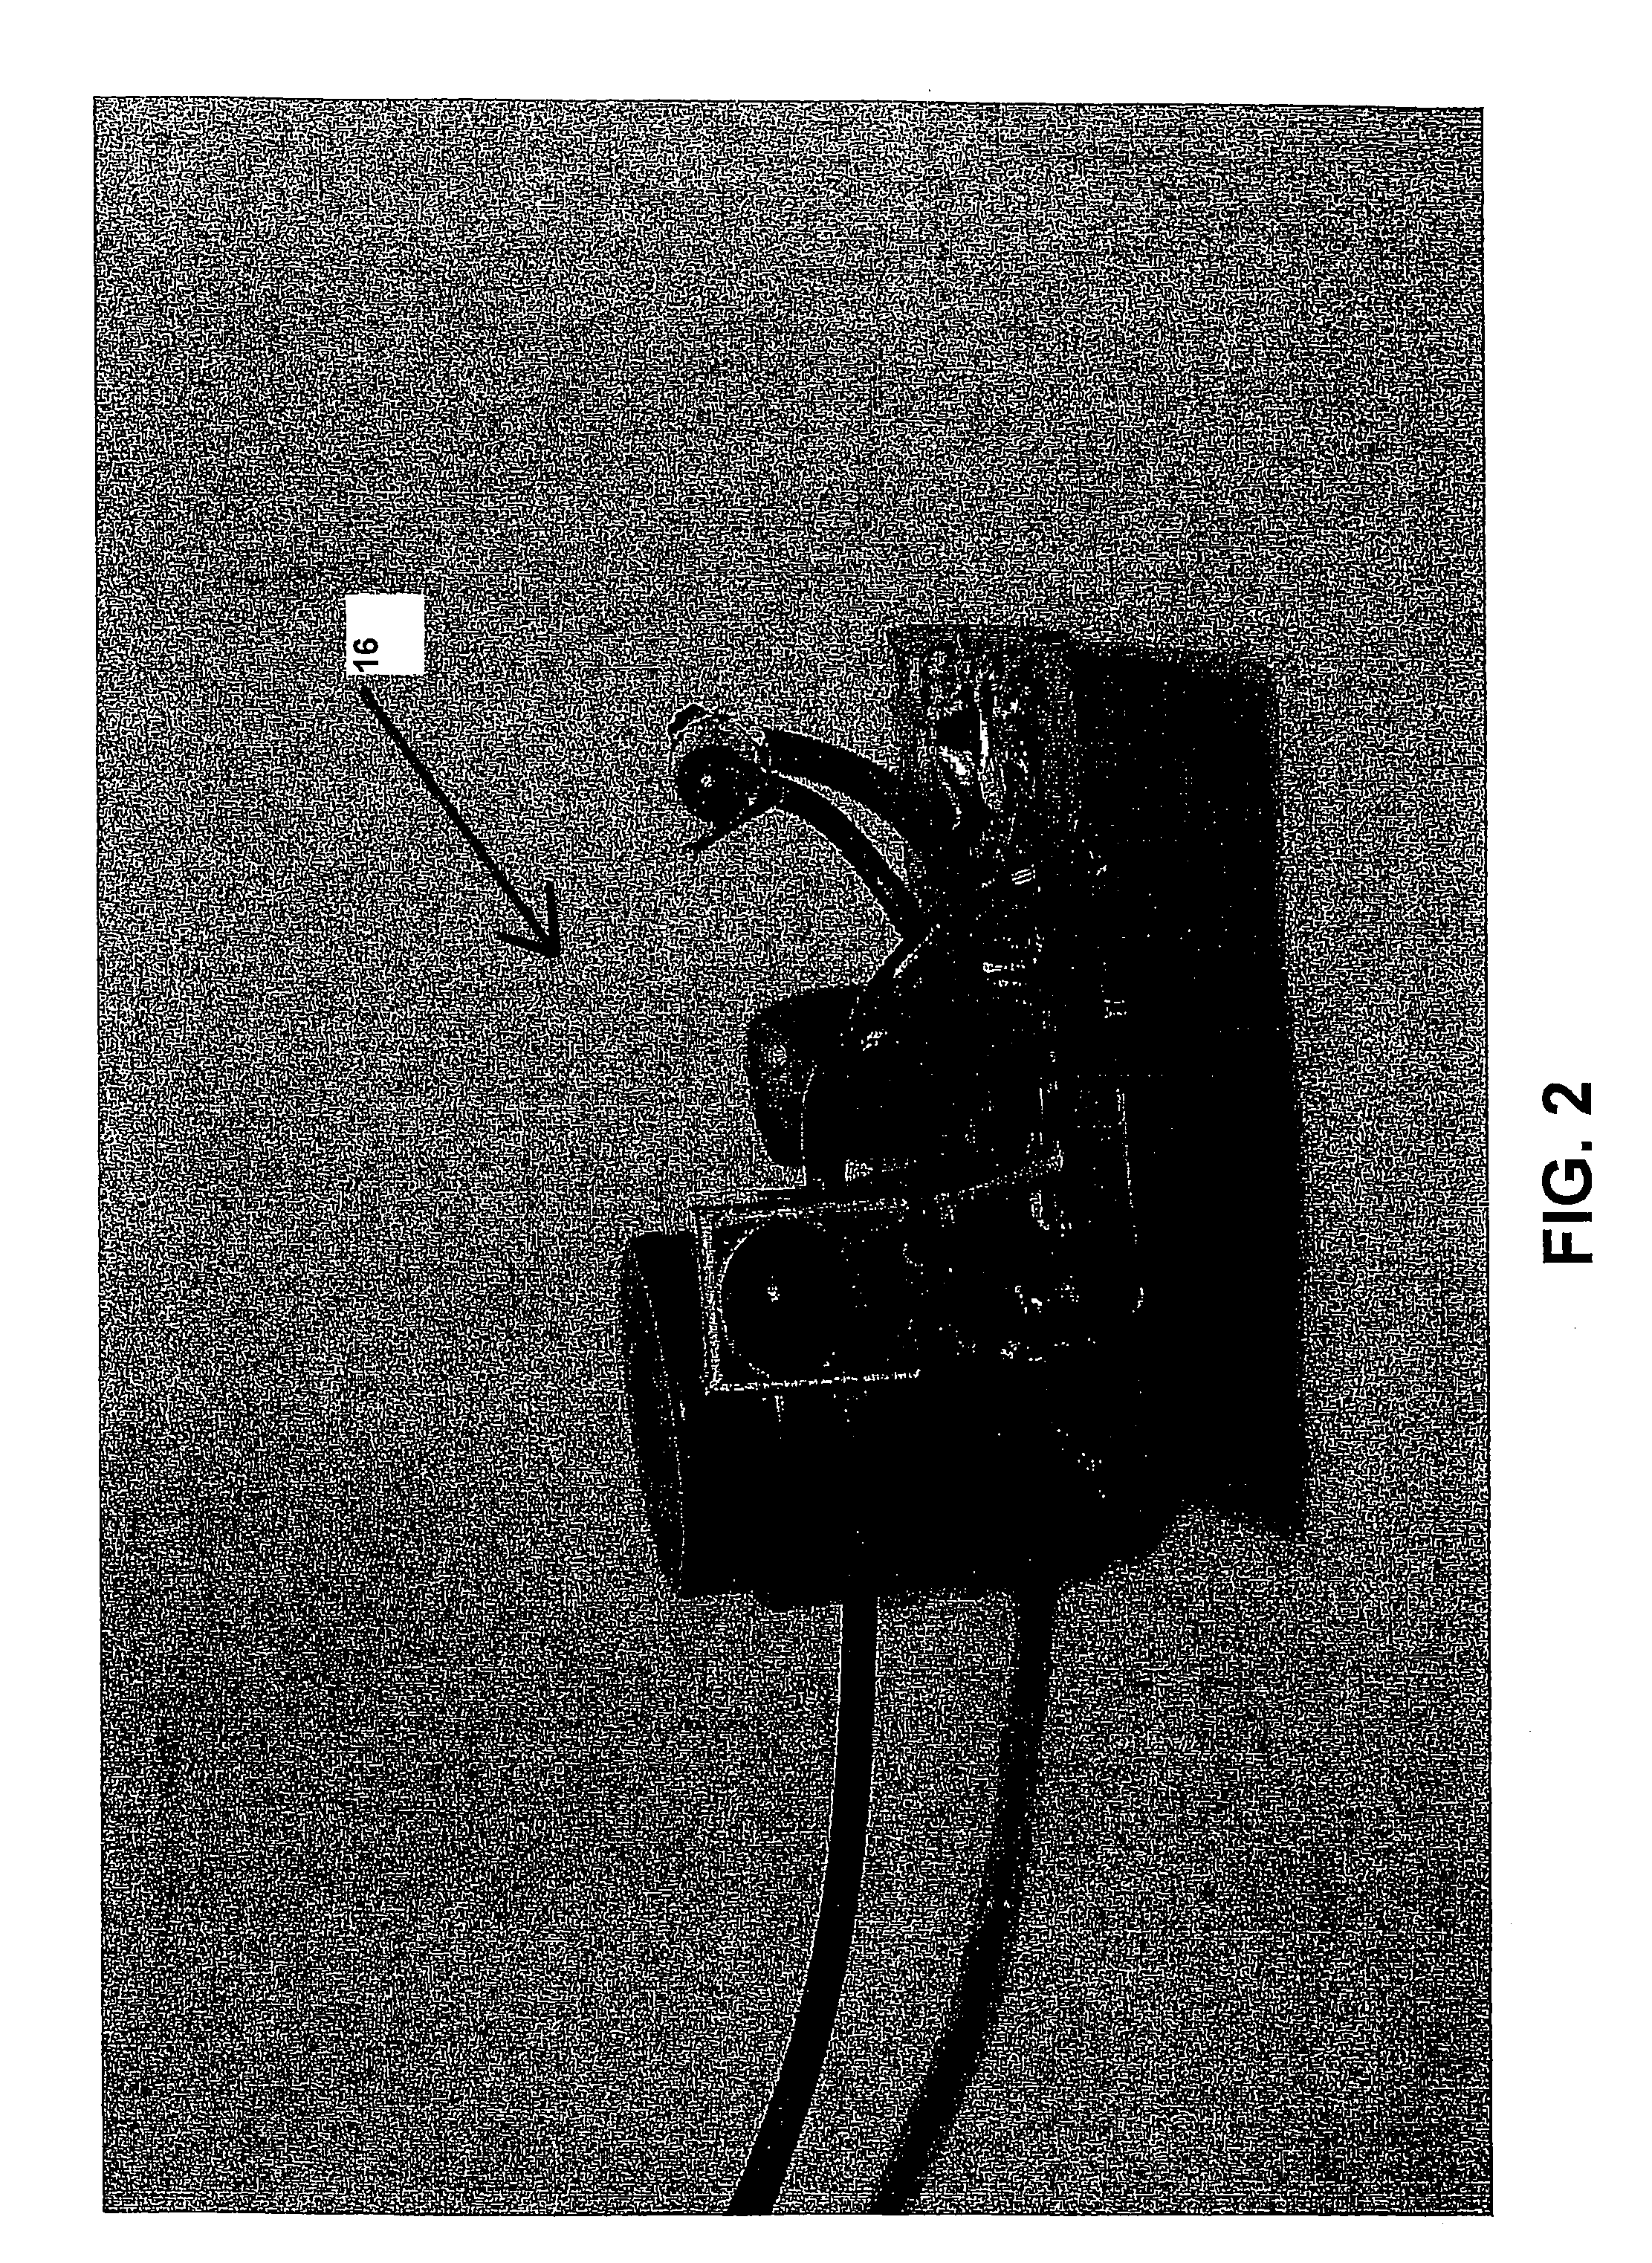 Method and system for preventing virus-related obesity and obesity related diseases